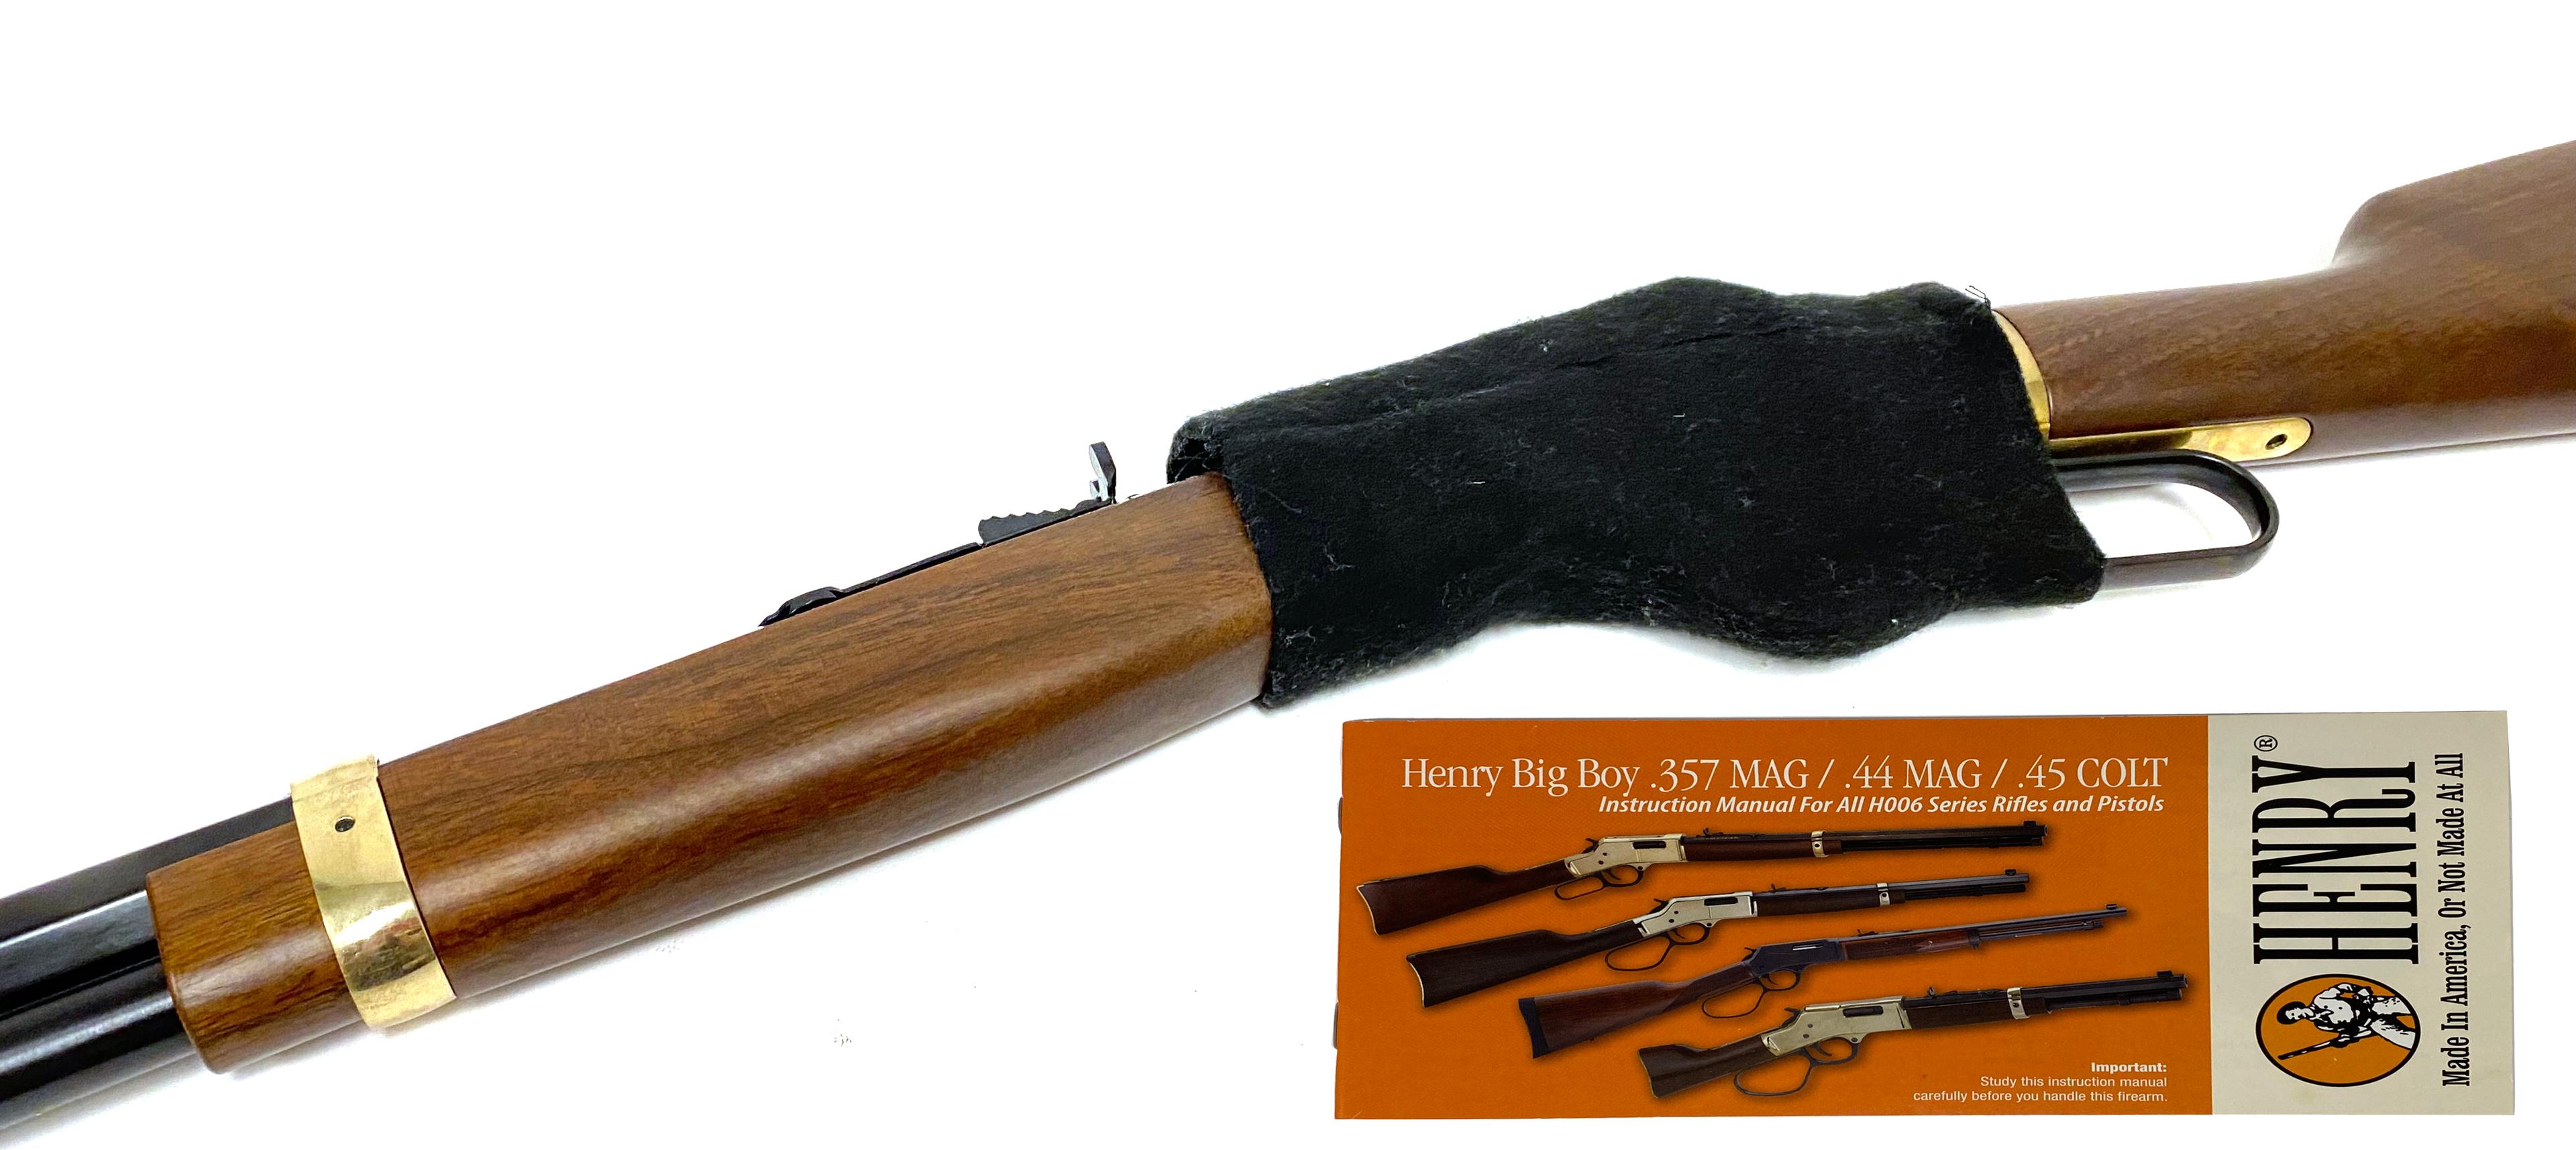 New Henry Big Boy .357 MAG/.38 SPL Lever Action Rifle